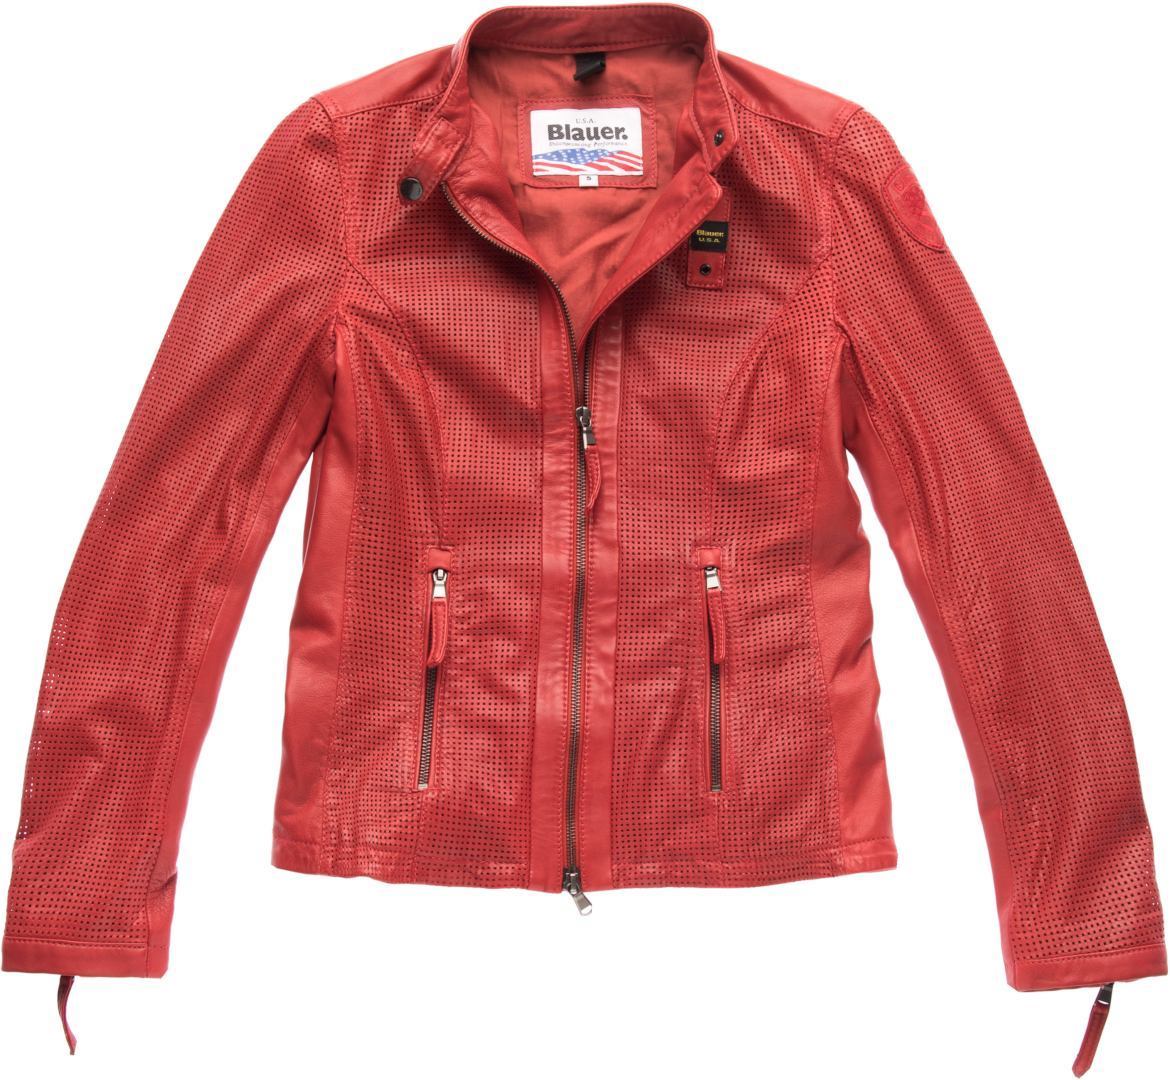 Image of Blauer USA Miller Giacca in pelle perforata Ladies, rosso, dimensione S per donne